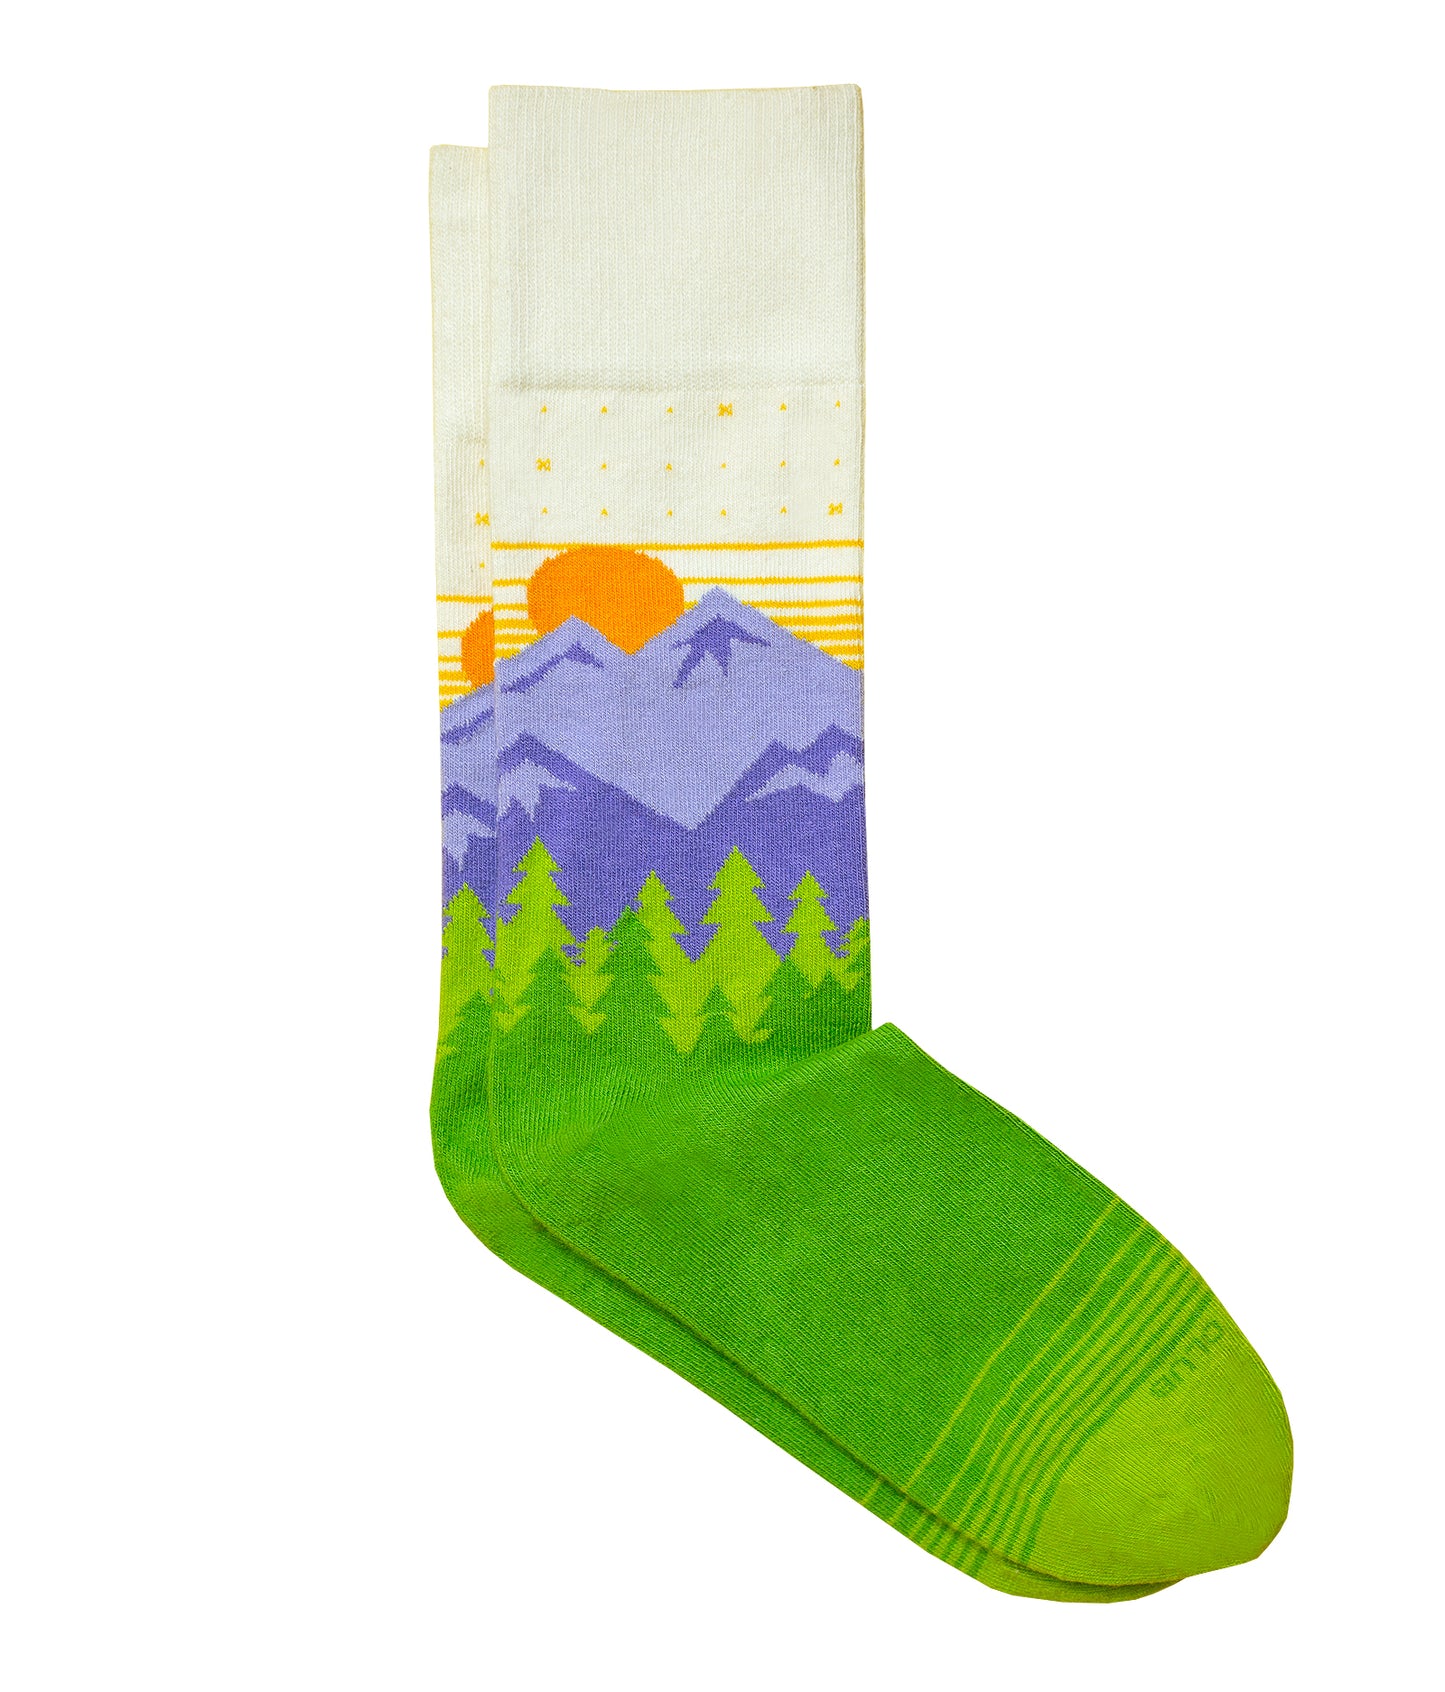 The Yellowstone sock in the Natural color variation. The sock features a mountain and forest vista.